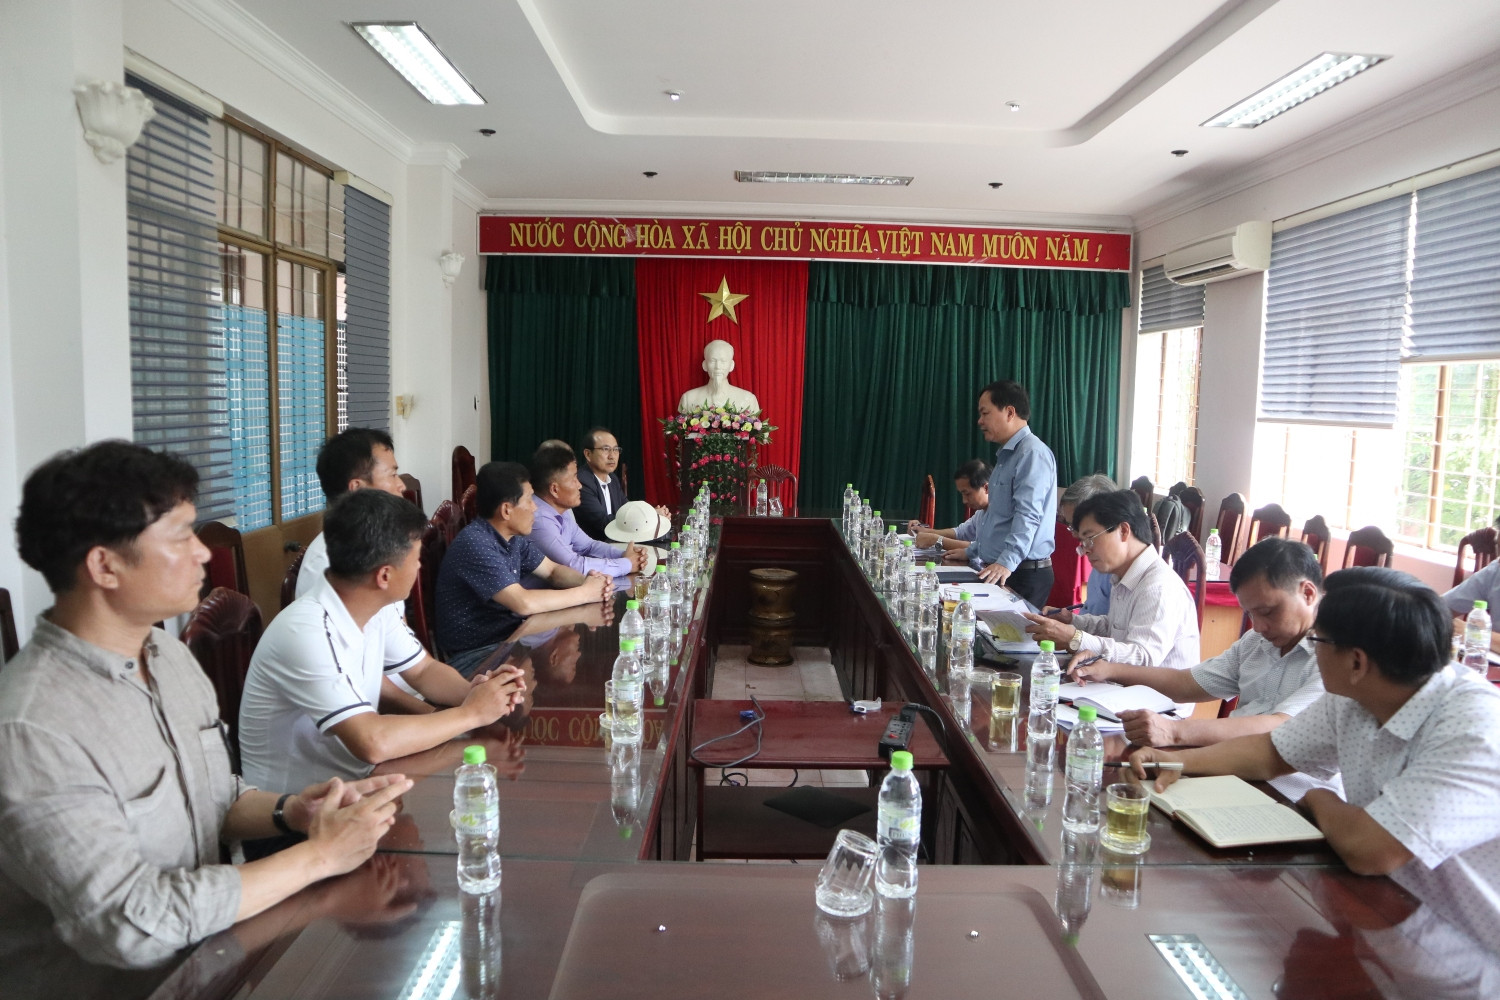 Delegation from the South Korean International Lotus Village discussed their projects in Quang Nam with the local authorities in August 2018. (http://tamkyrt.vn)